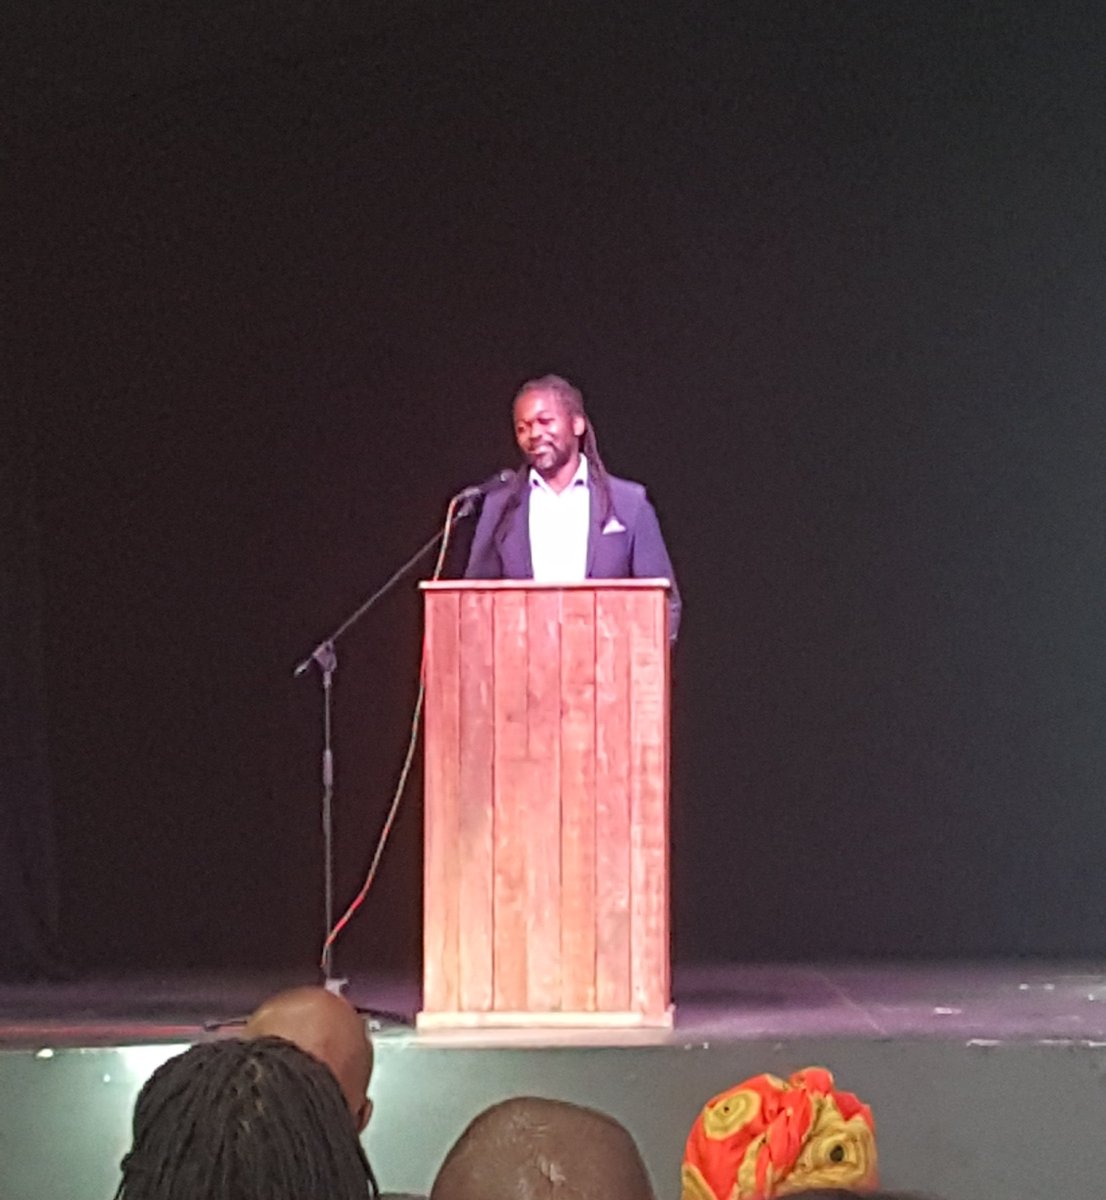 The incomporable @AfricaMelane is speaking @PYDAcademy #graduation about the value of education in his journey from accountant and auditor to teacher to broadcaster @CapeTalk  'Be gratfeul for the opportunity you have been afforded, but don't be limited by it' #launchingtalent